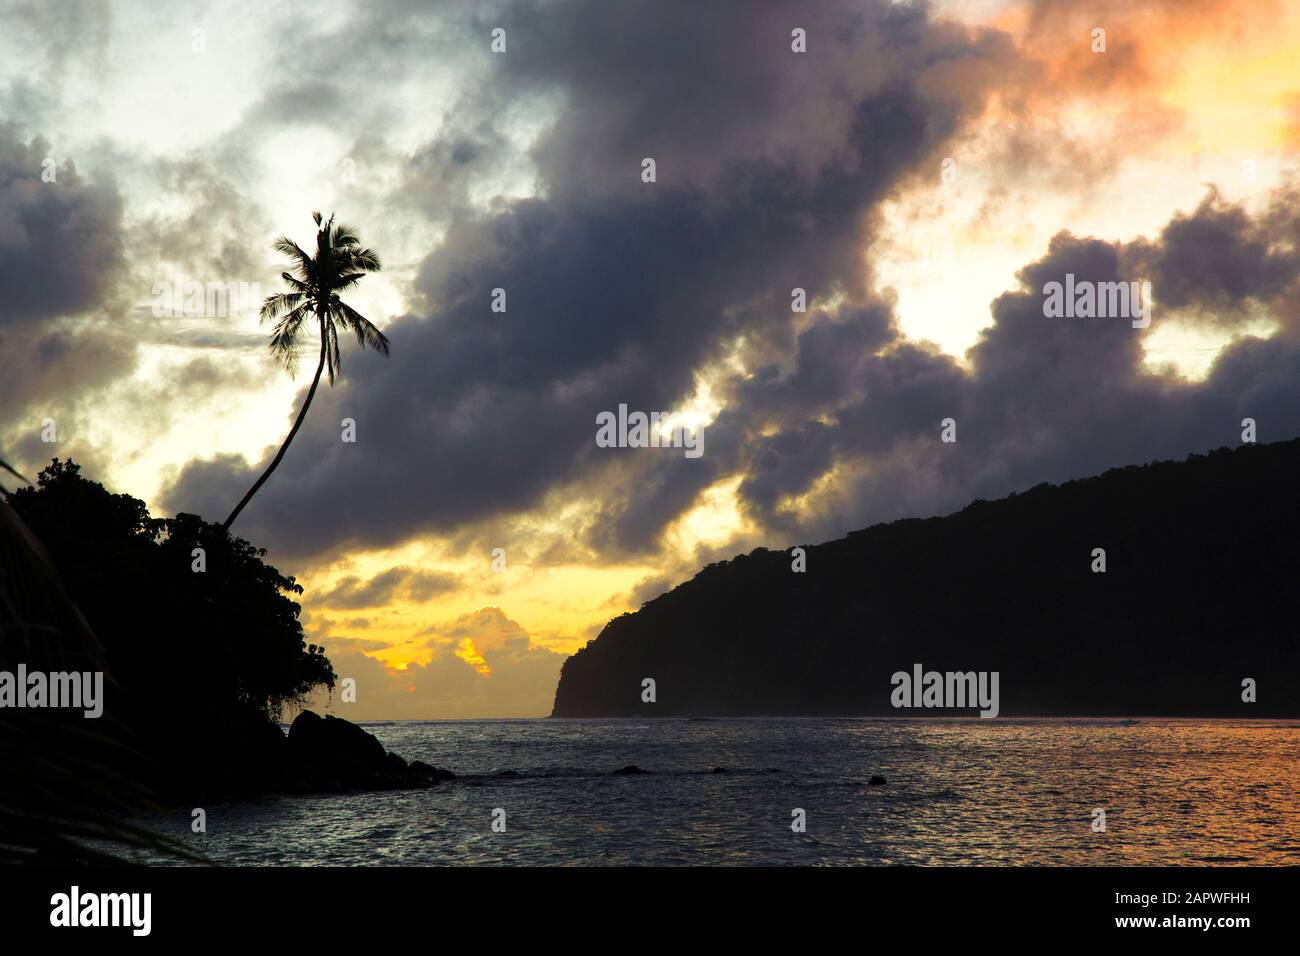 Silhouette of leaning palm tree at beach during an orange sunrise Stock Photo